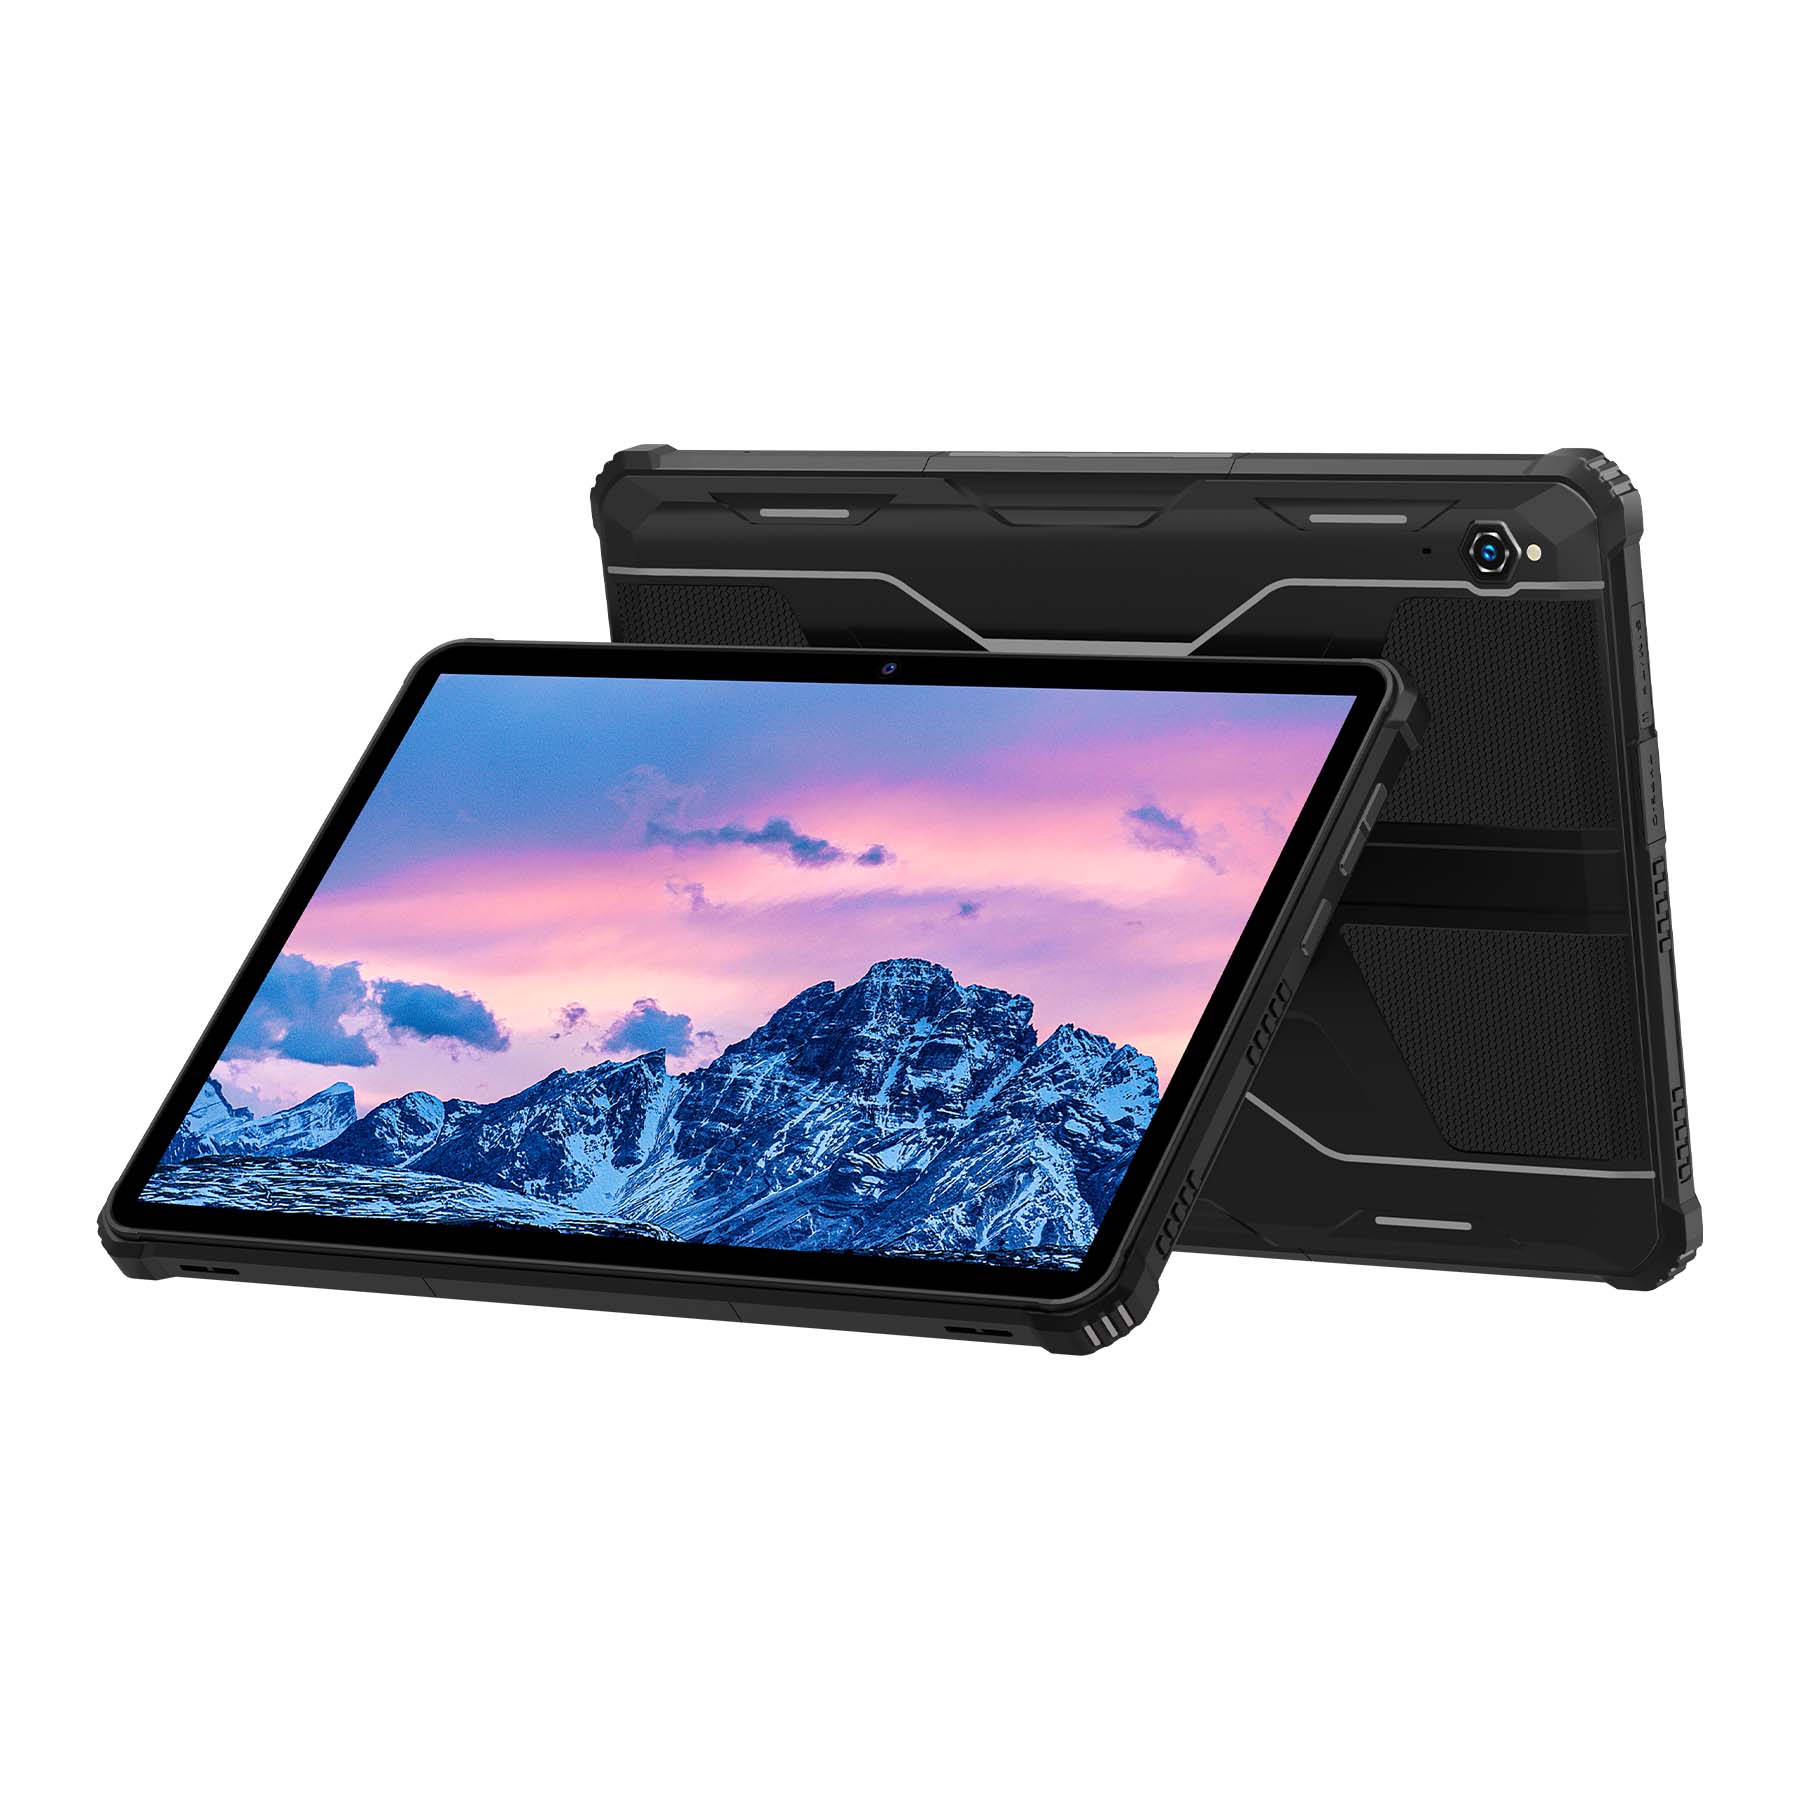 Find OUKITEL RT1 Helio P22 MT8768WA Octa Core 4GB RAM 64GB ROM 4G LTE 10.1 Inch Androd 11 Fingerprint ID Rugged Tablet for Sale on Gipsybee.com with cryptocurrencies